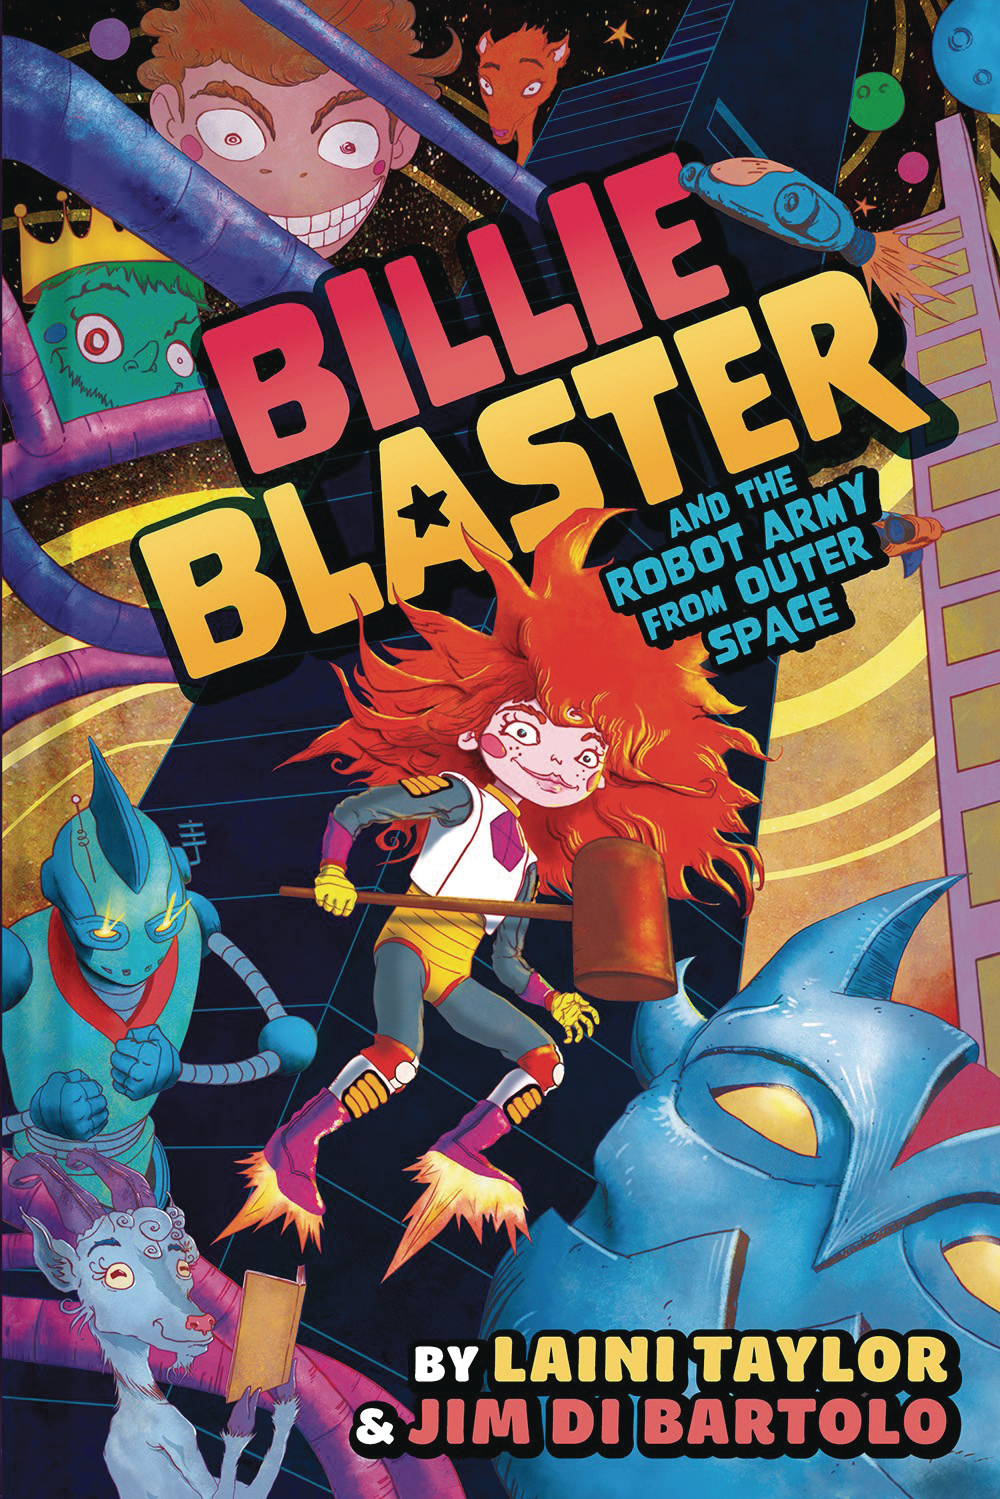 Billie Blaster & Robot Army From Outer Space Hardcover Graphic Novel